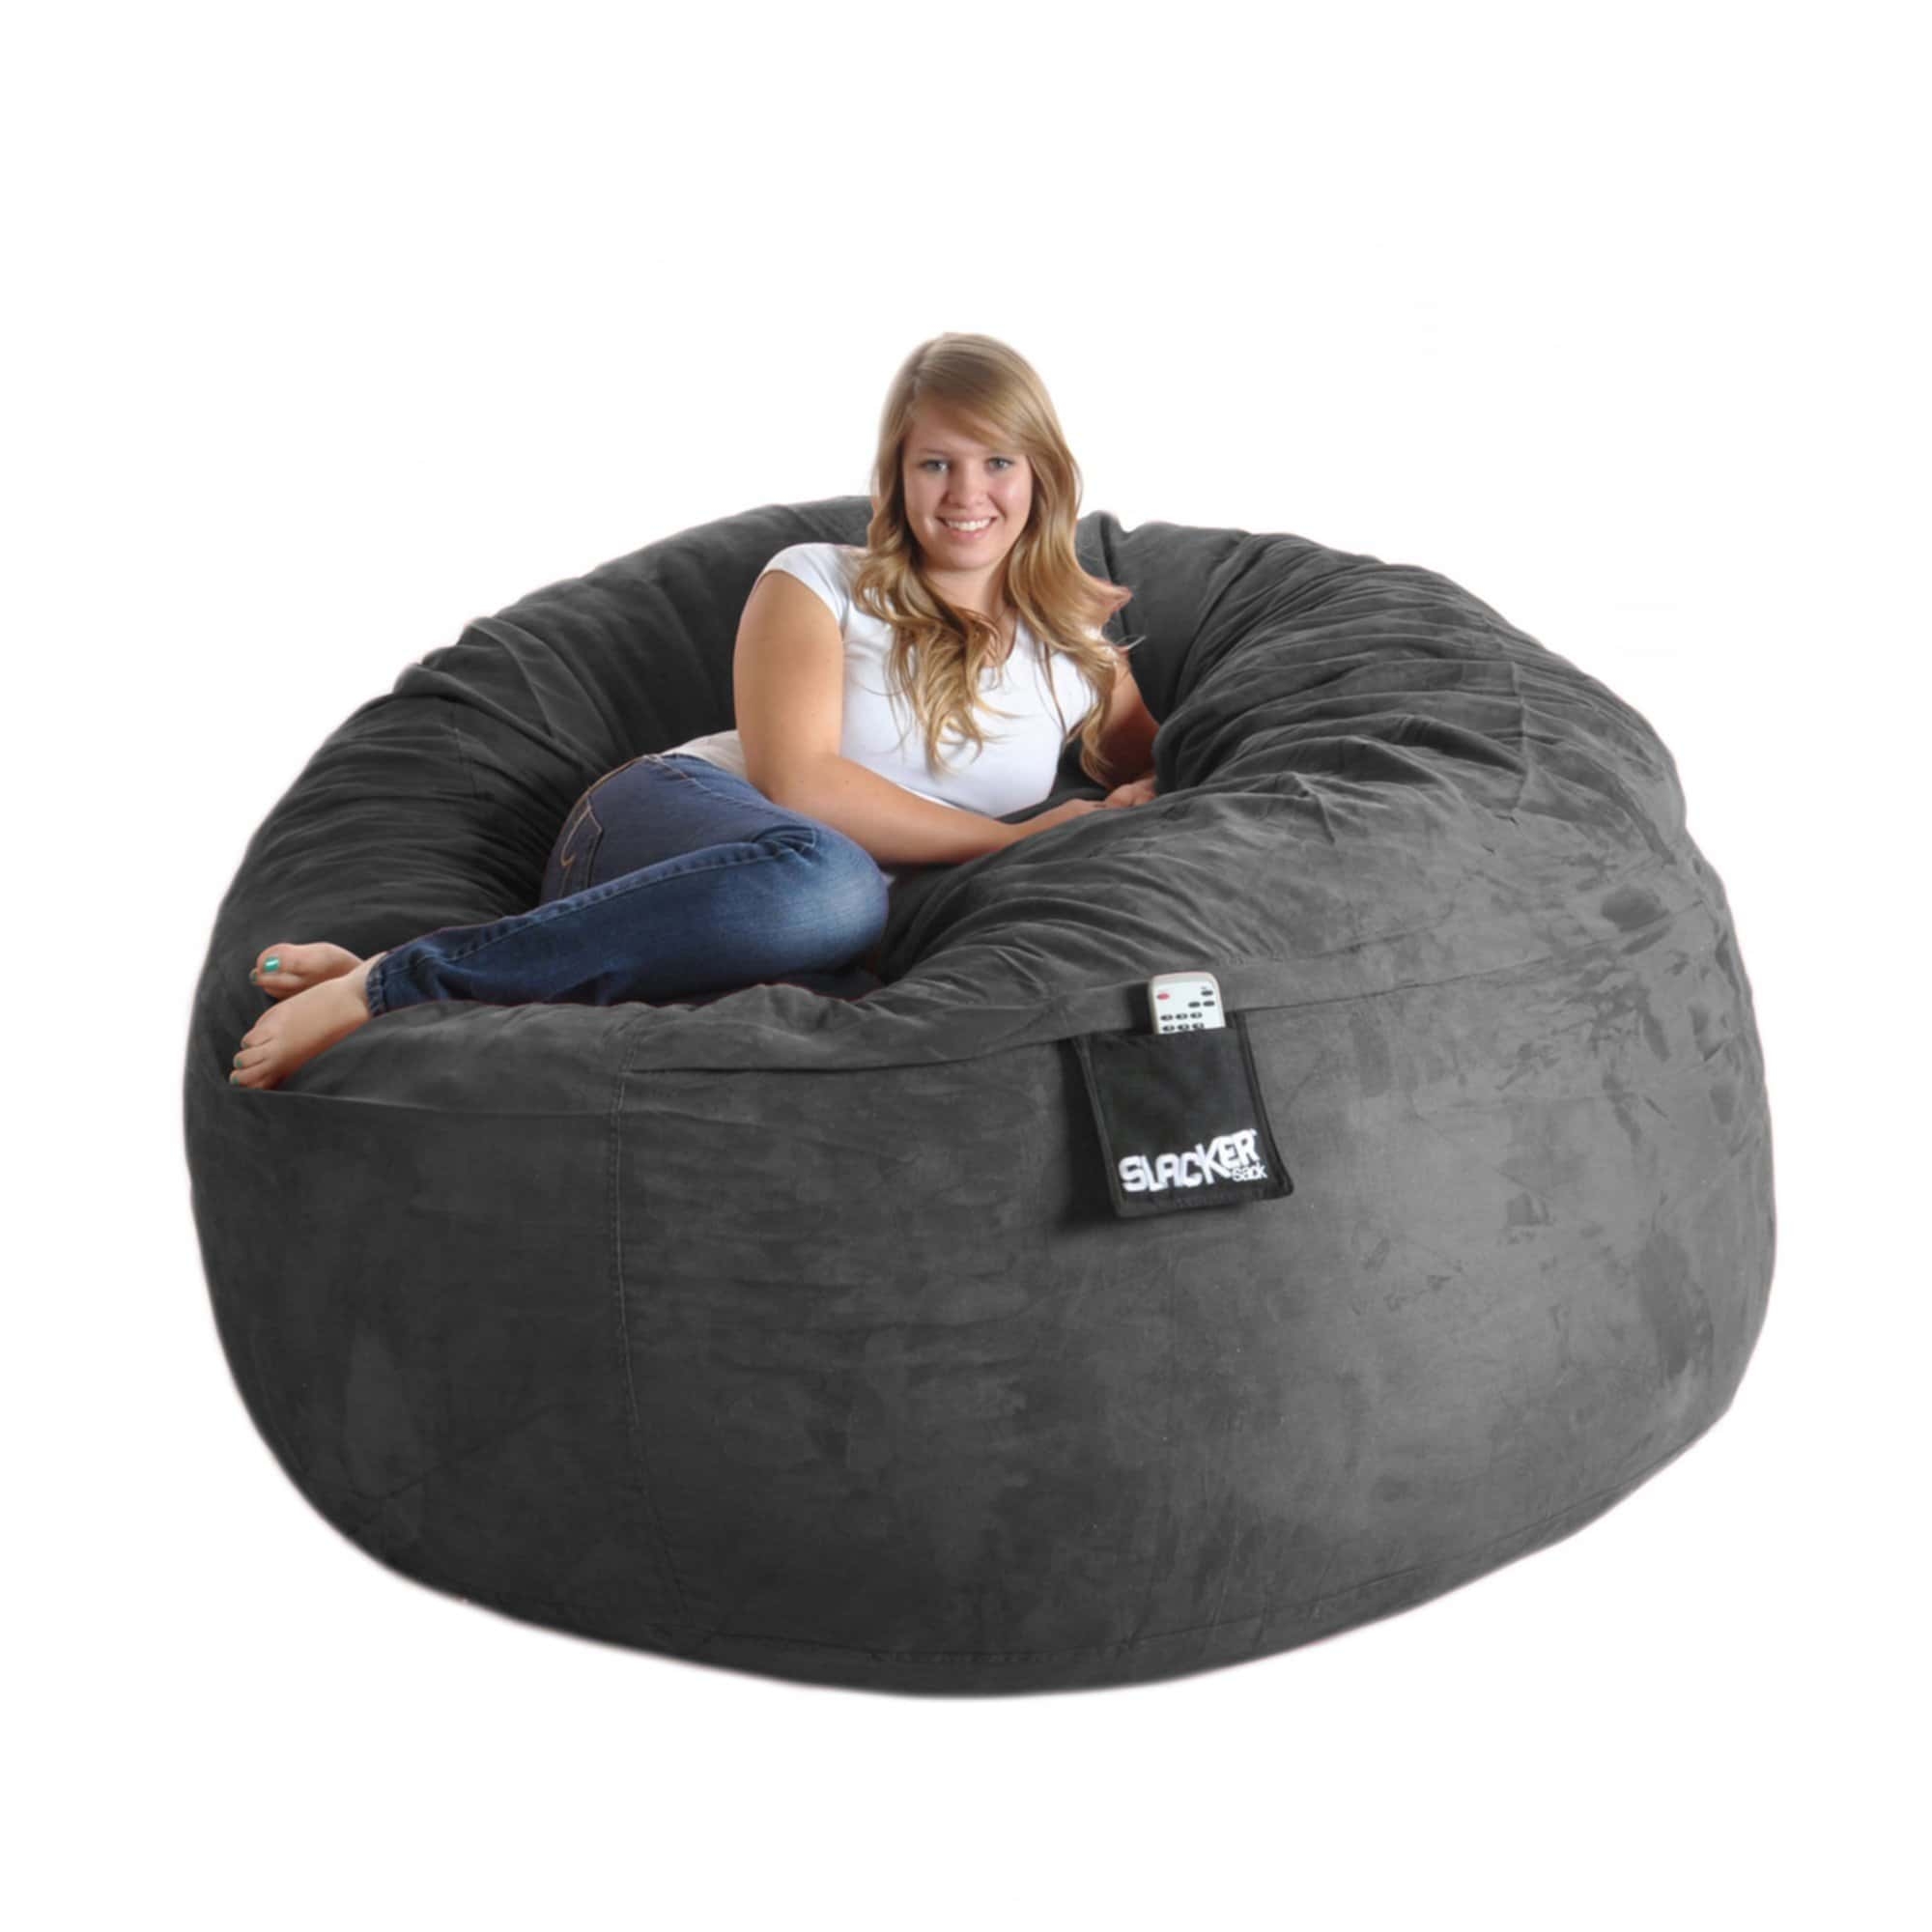 bean bag chairs for adults you'll love in 2020  visualhunt